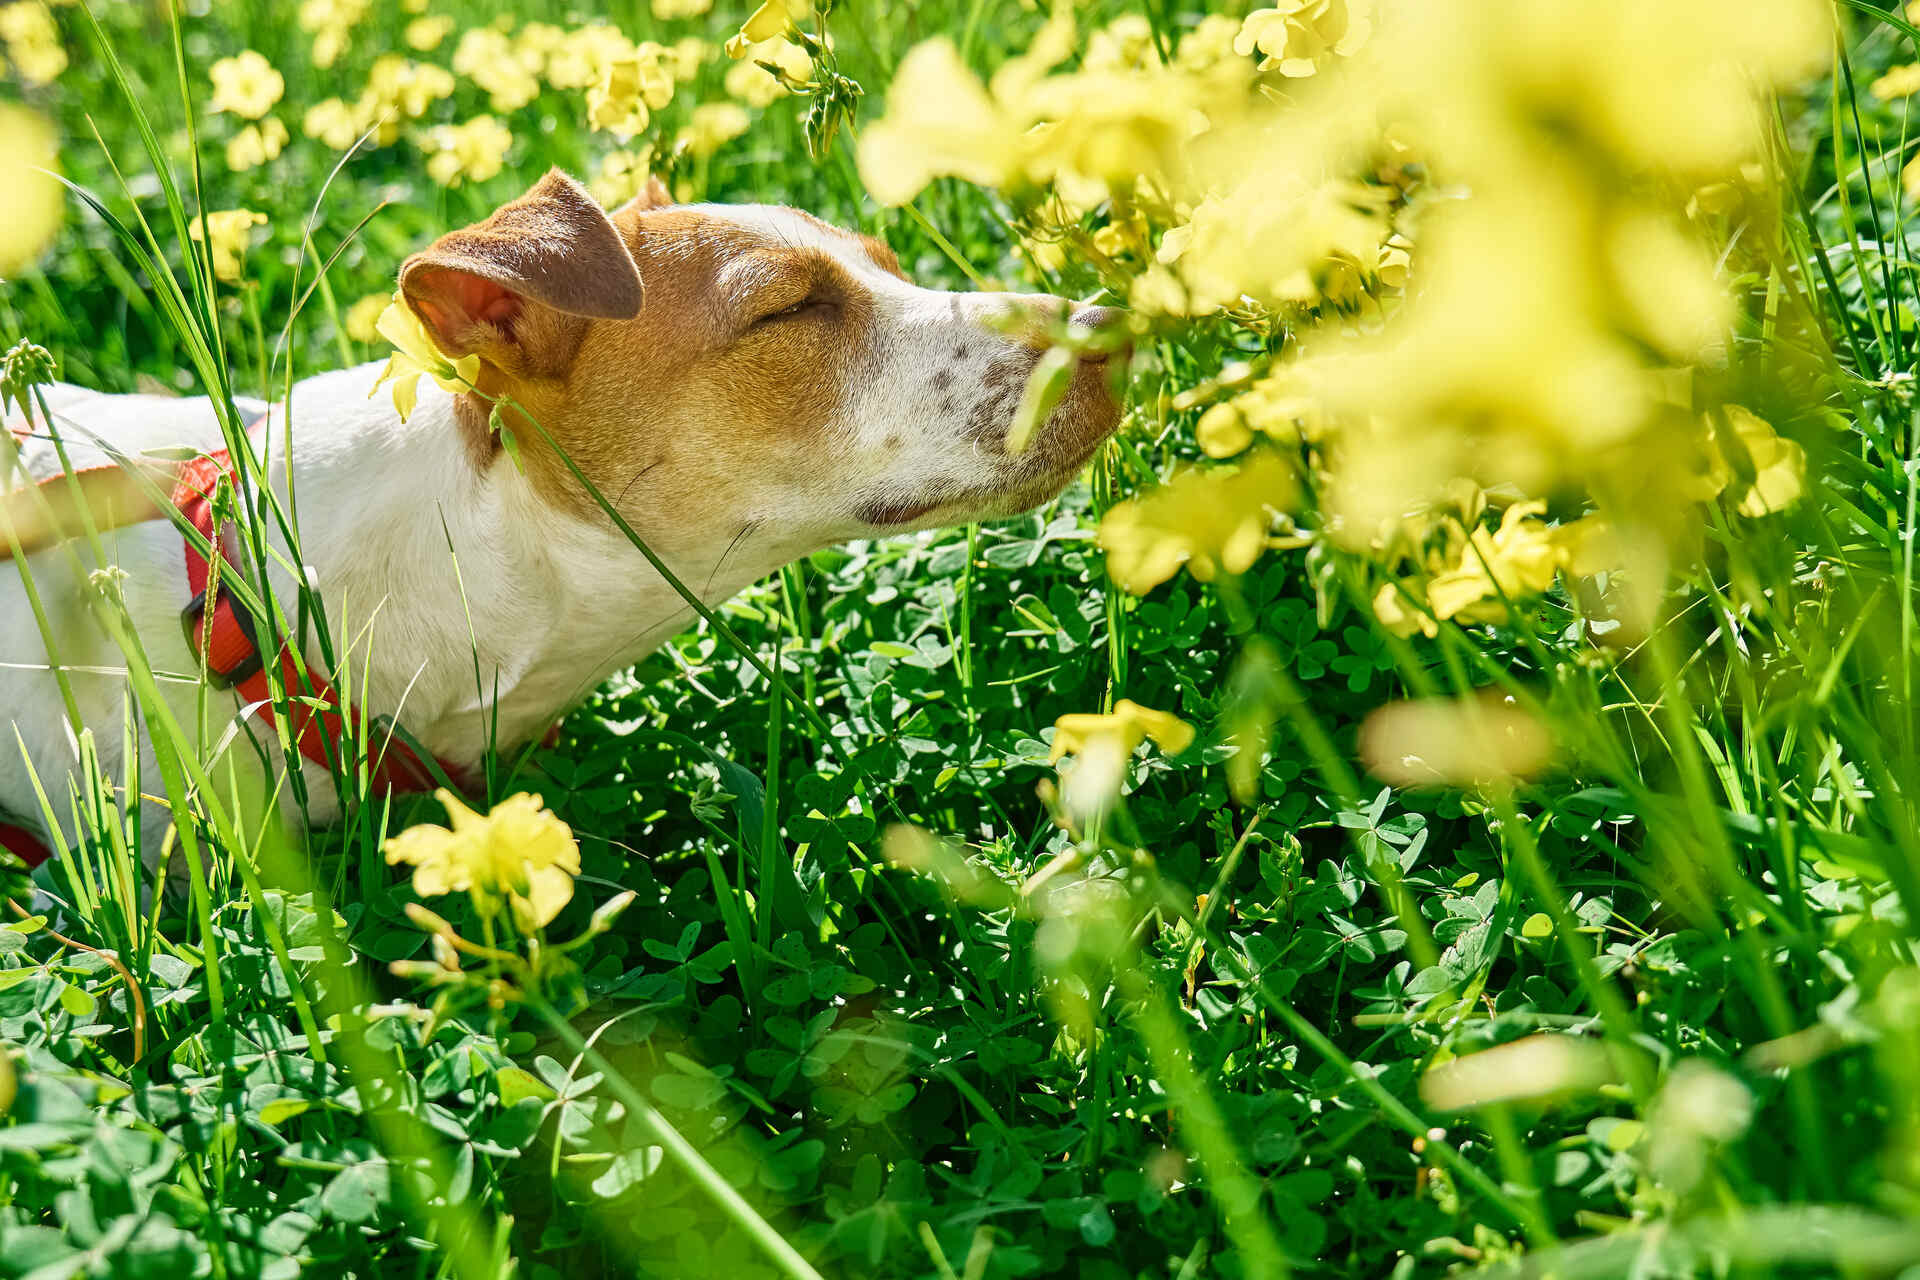 A dog sniffing flowers in a meadow